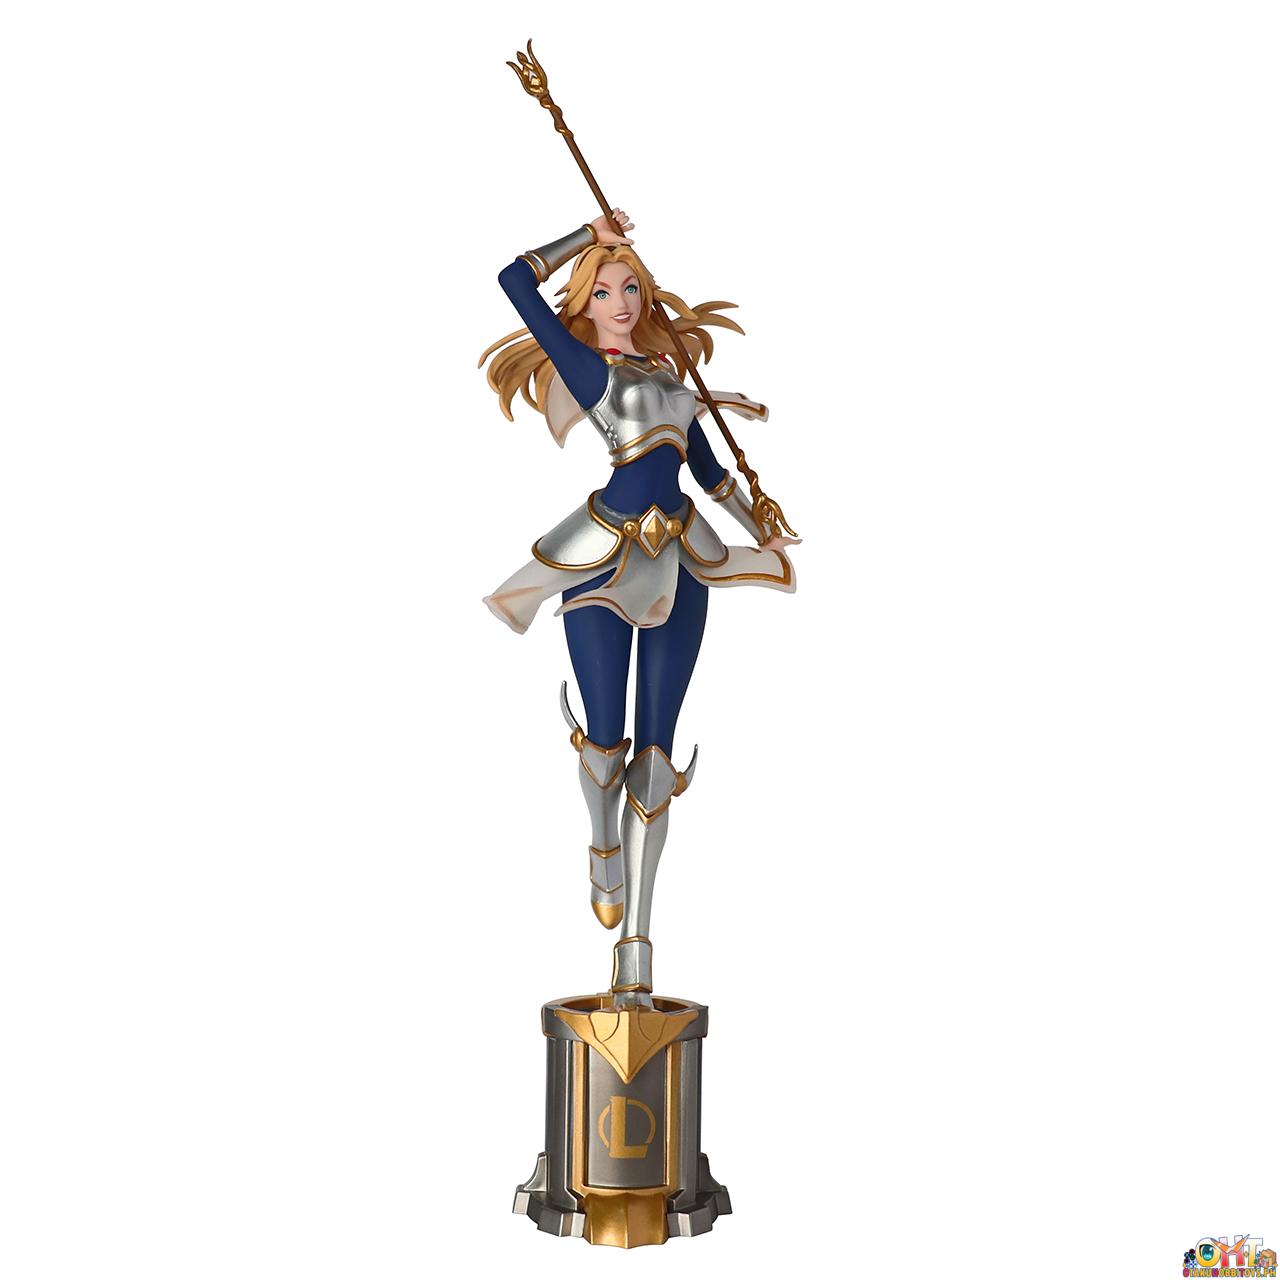 CMGE x League of Legends LUX: The Lady of Luminosity Figure Pen